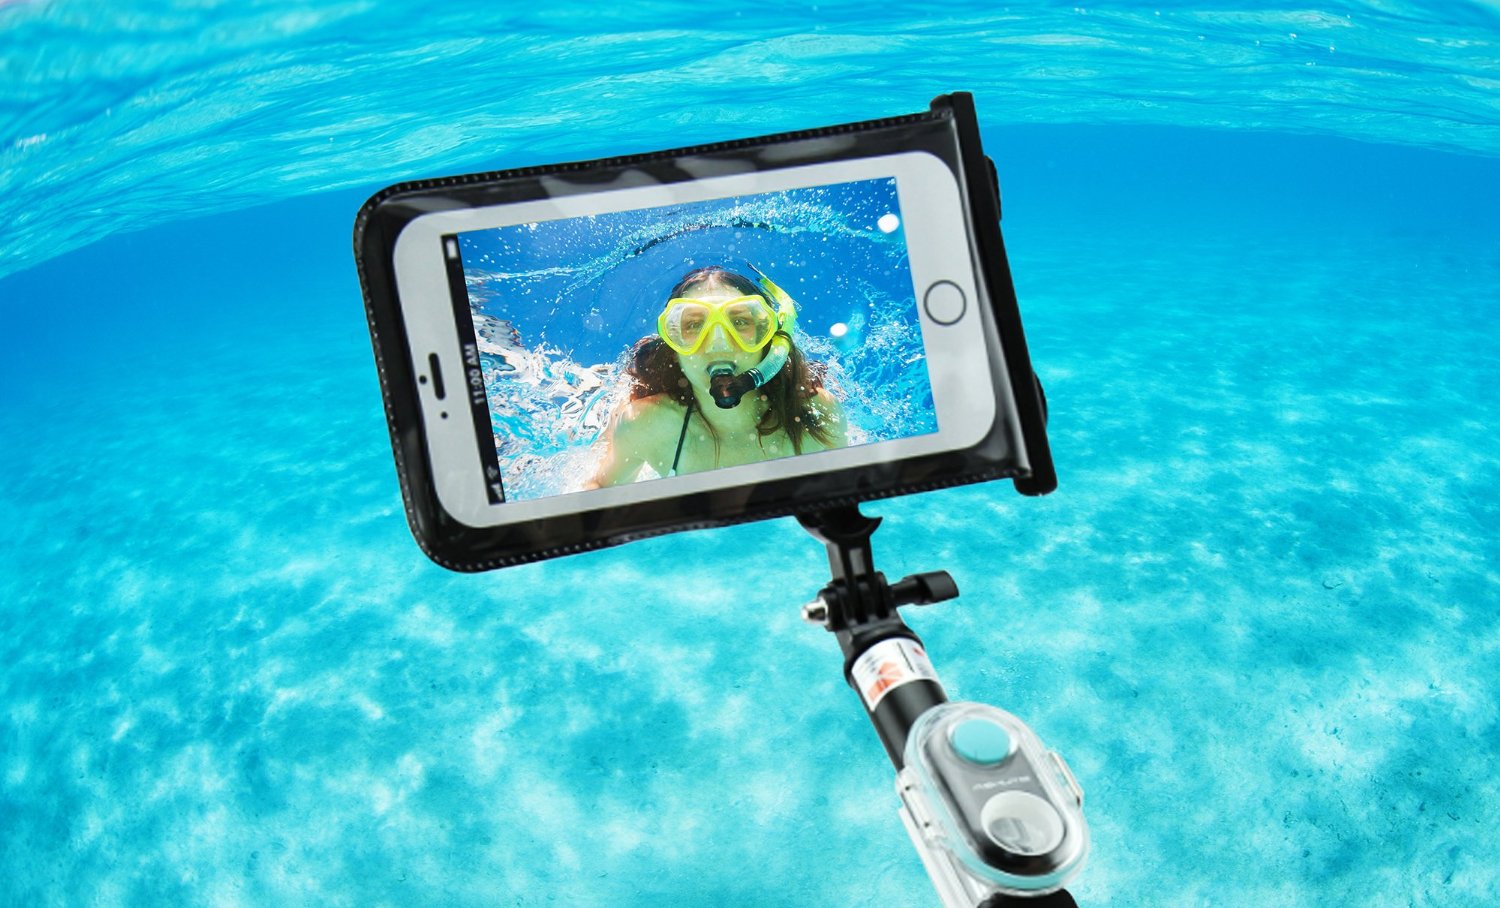 photography, camera accessories, bluetooth selfie stick, selfie stick, selfie sticks, bluetooth selfie sticks, waterproof selfie sticks, best selfie stick, best selfie sticks, monopod, monopods, smartphone selfie stick, iphone selfie stick